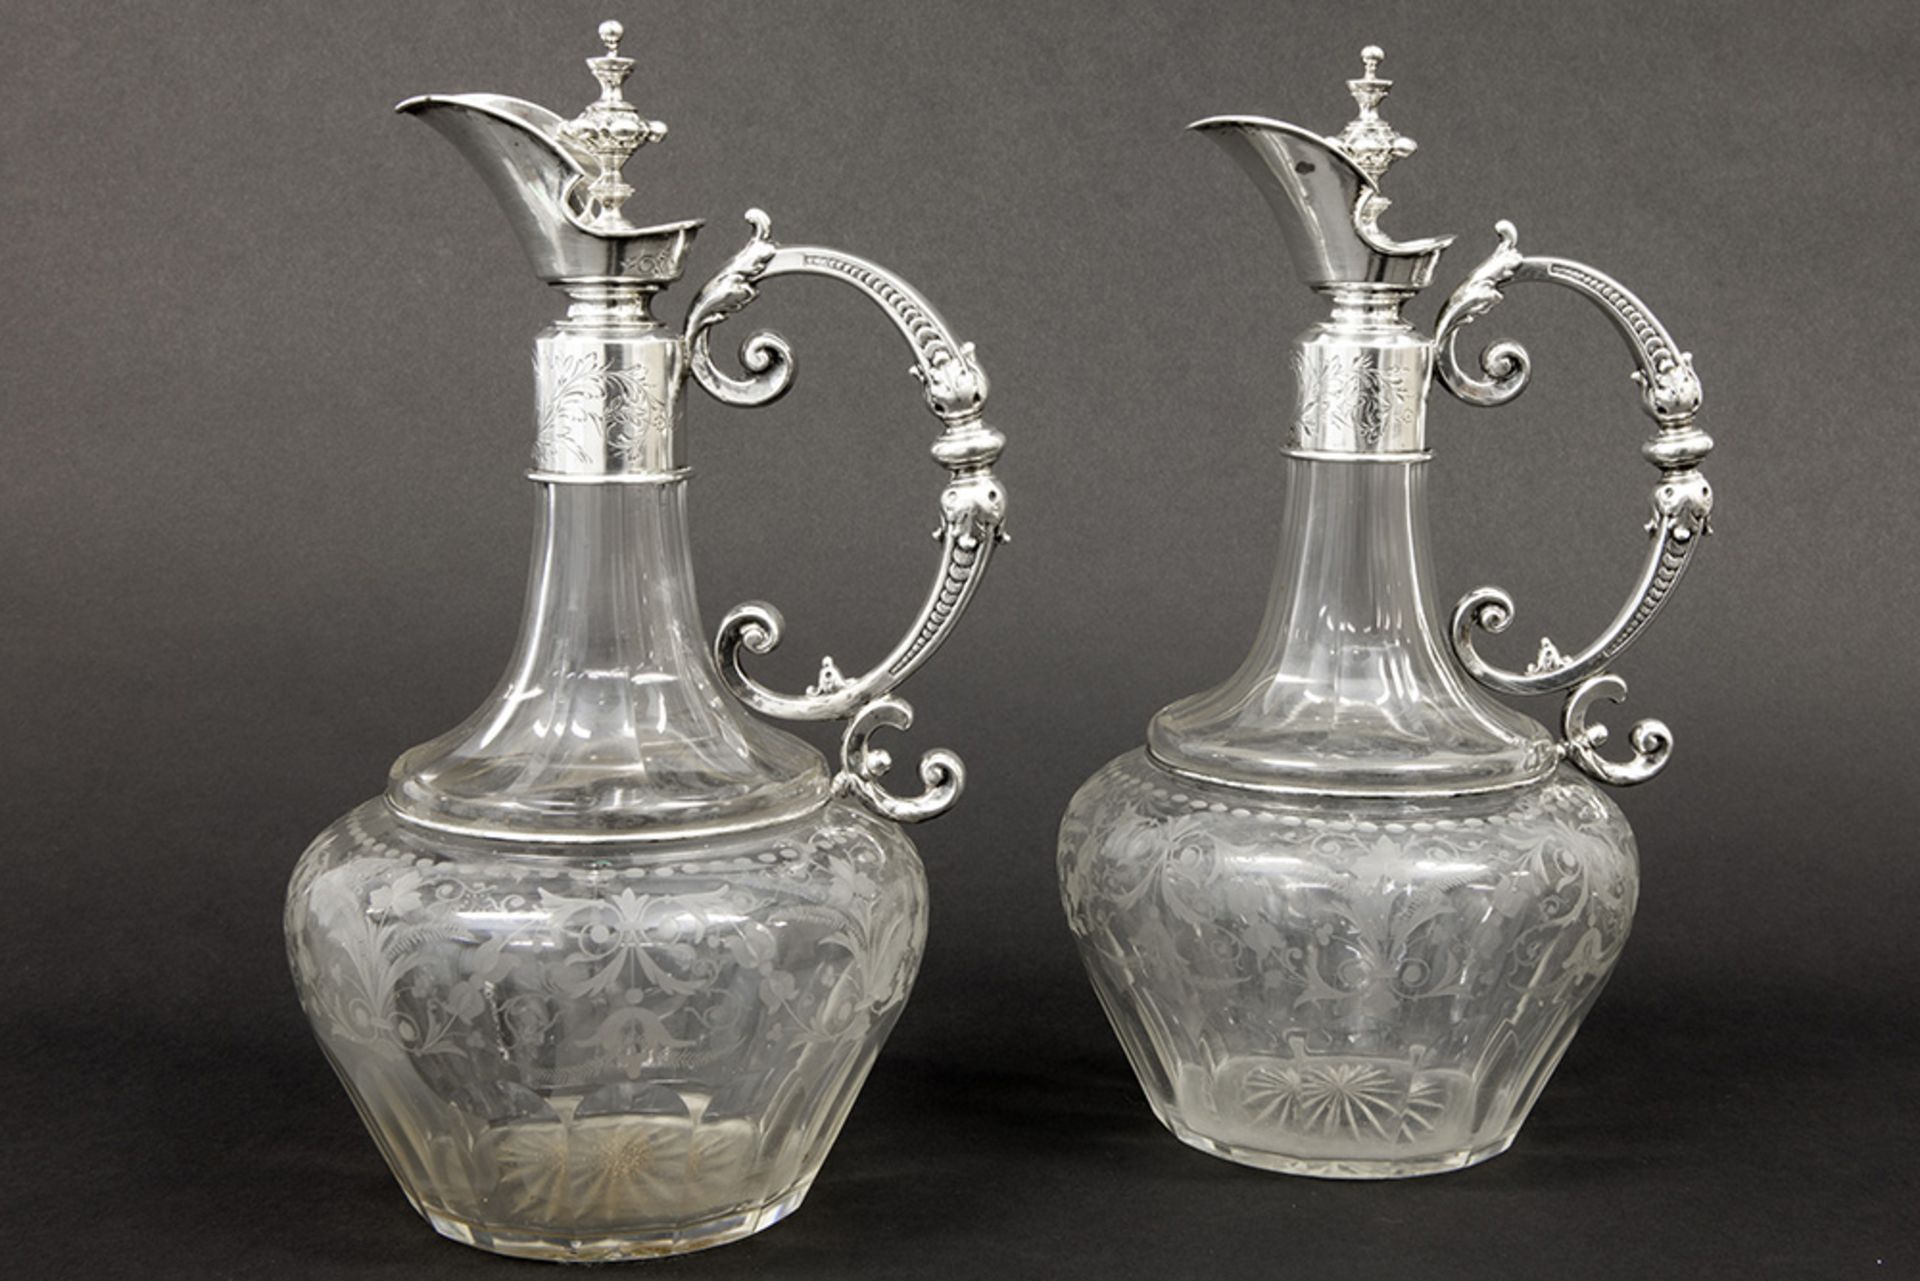 nice pair of antique German decanters/claret jugs in partially etched clear glass and marked